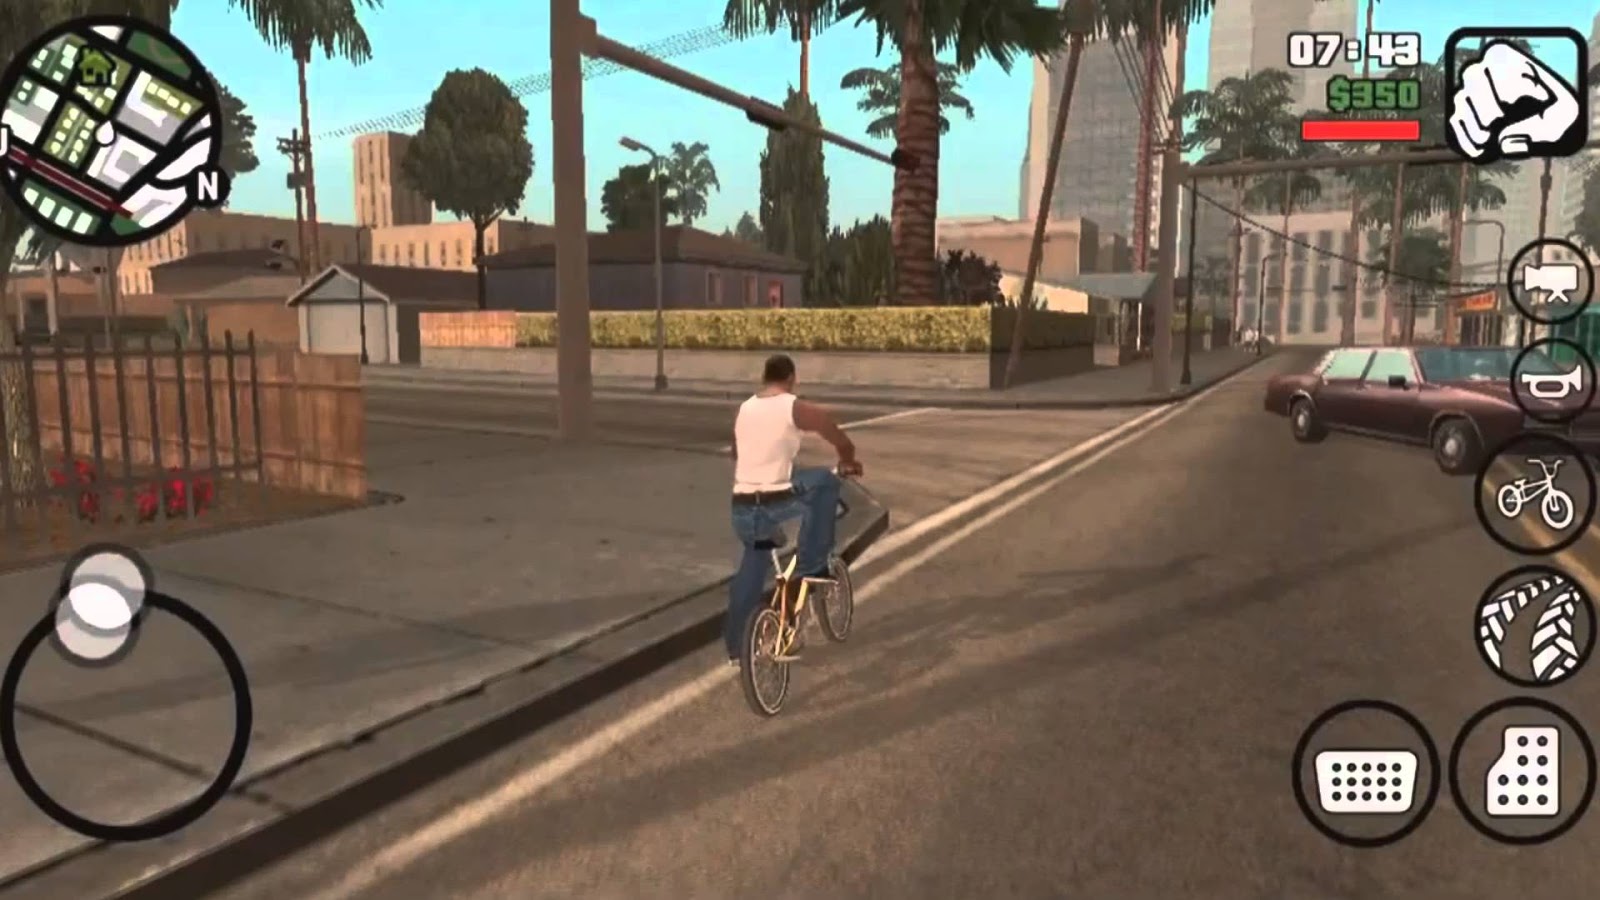 Gta san andreas 2 download for android phone